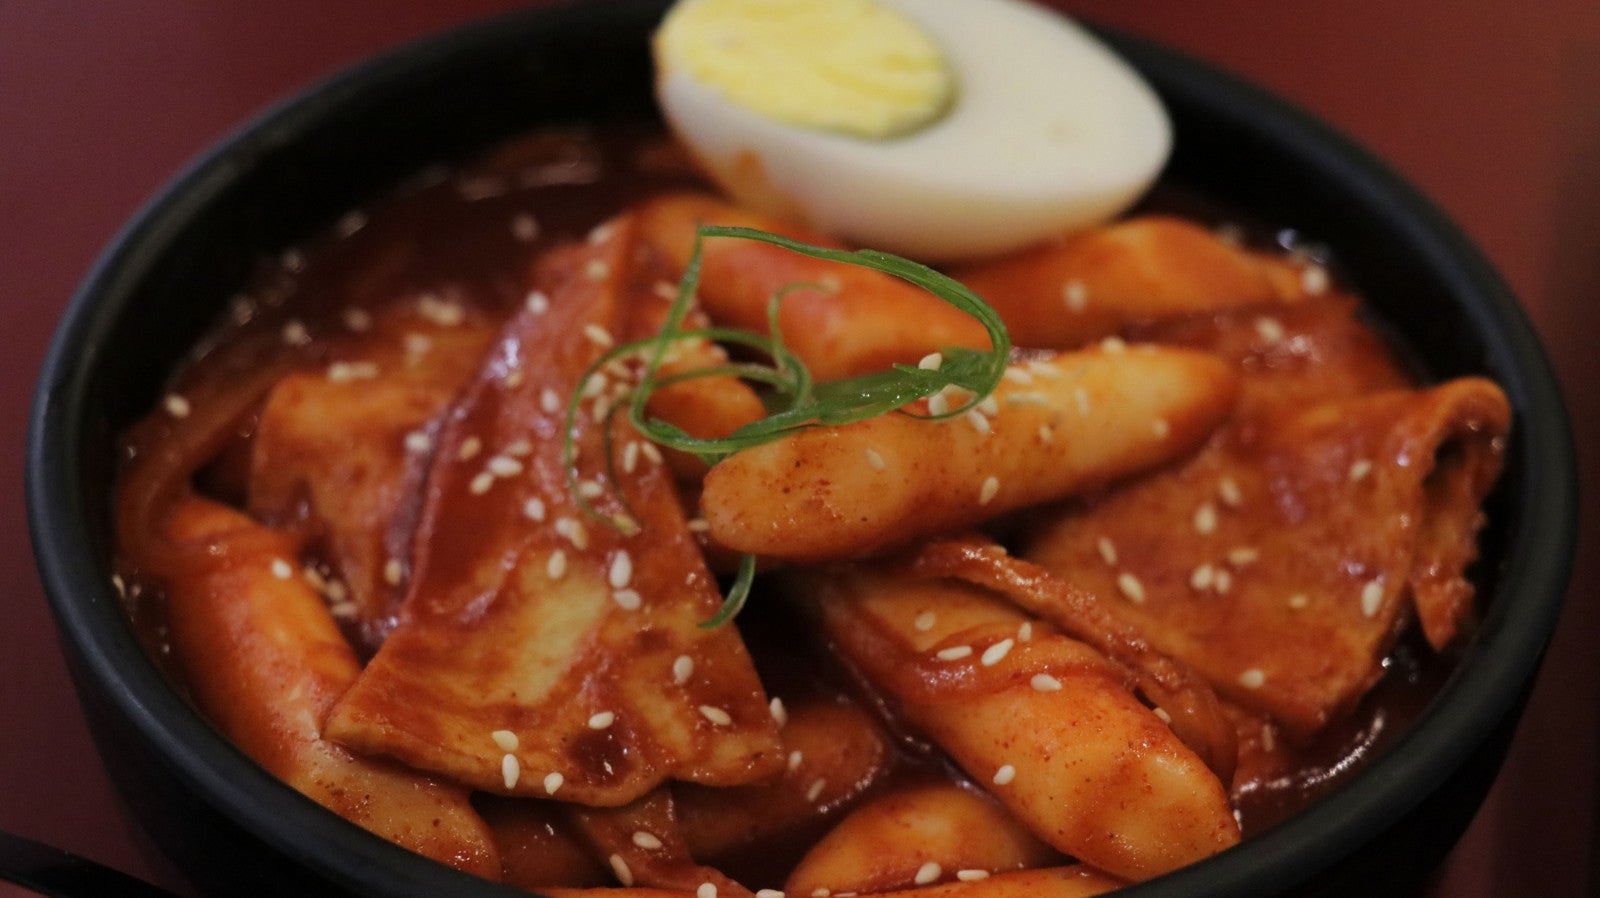 This Restaurant in KL Serves Delicious Korean Food That Is Super Affordable! - WORLD OF BUZZ 4